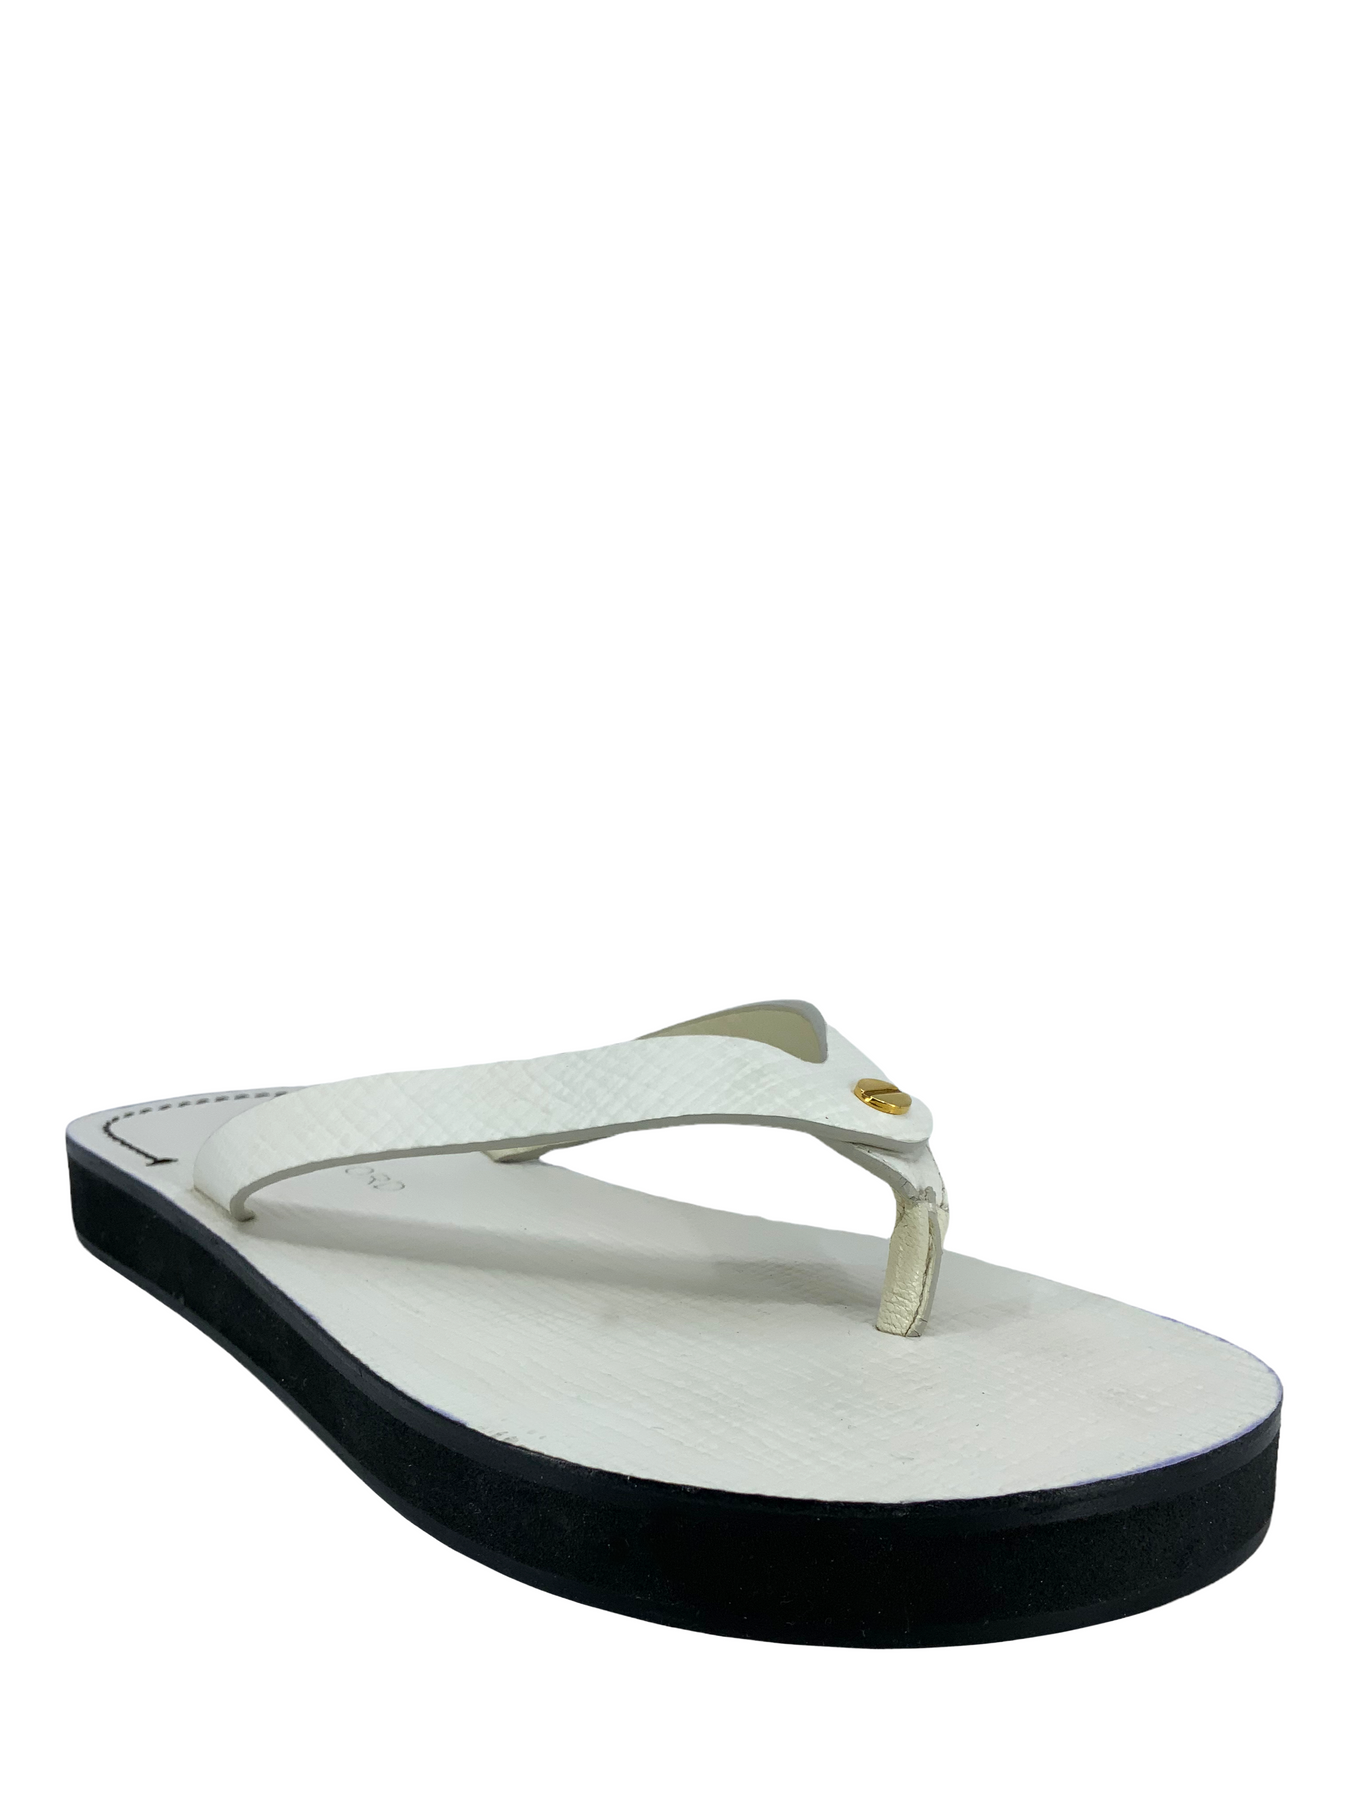 TOM FORD Textured Leather Thong Sandals Size 6 - Consigned Designs